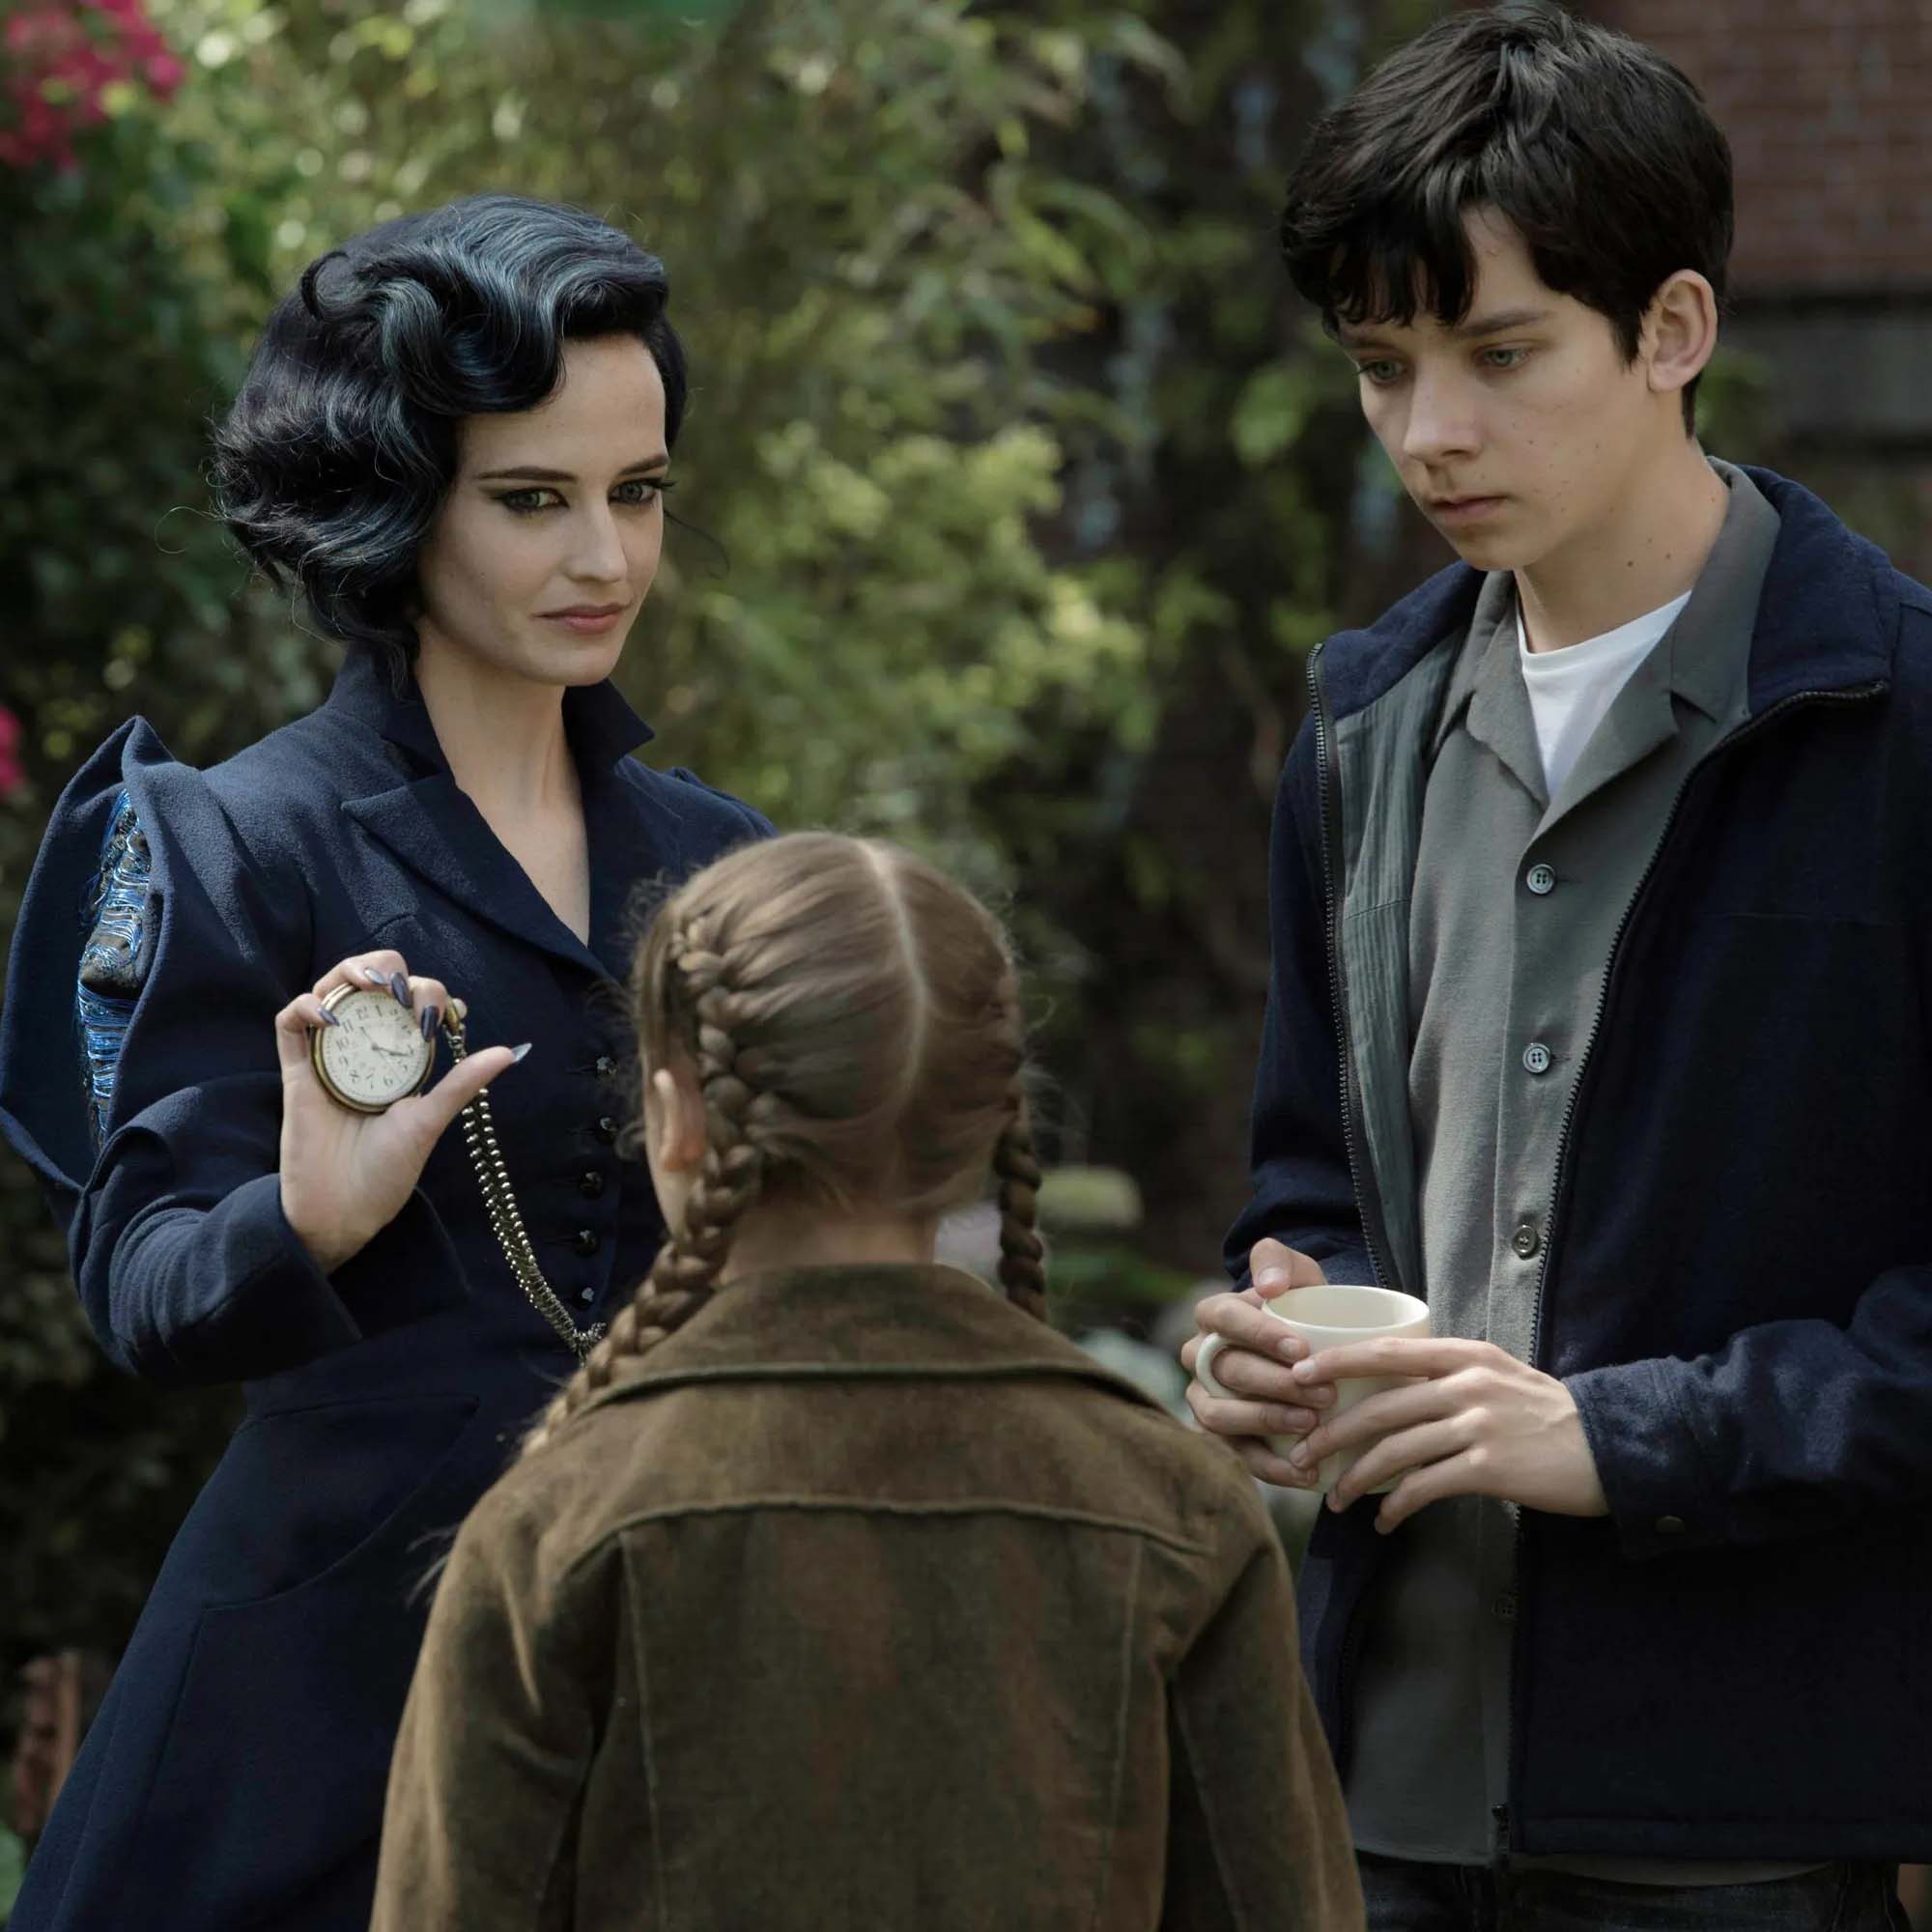 Eva Green and Asa Butterfield in Miss Peregrine's Home for Peculiar Children.